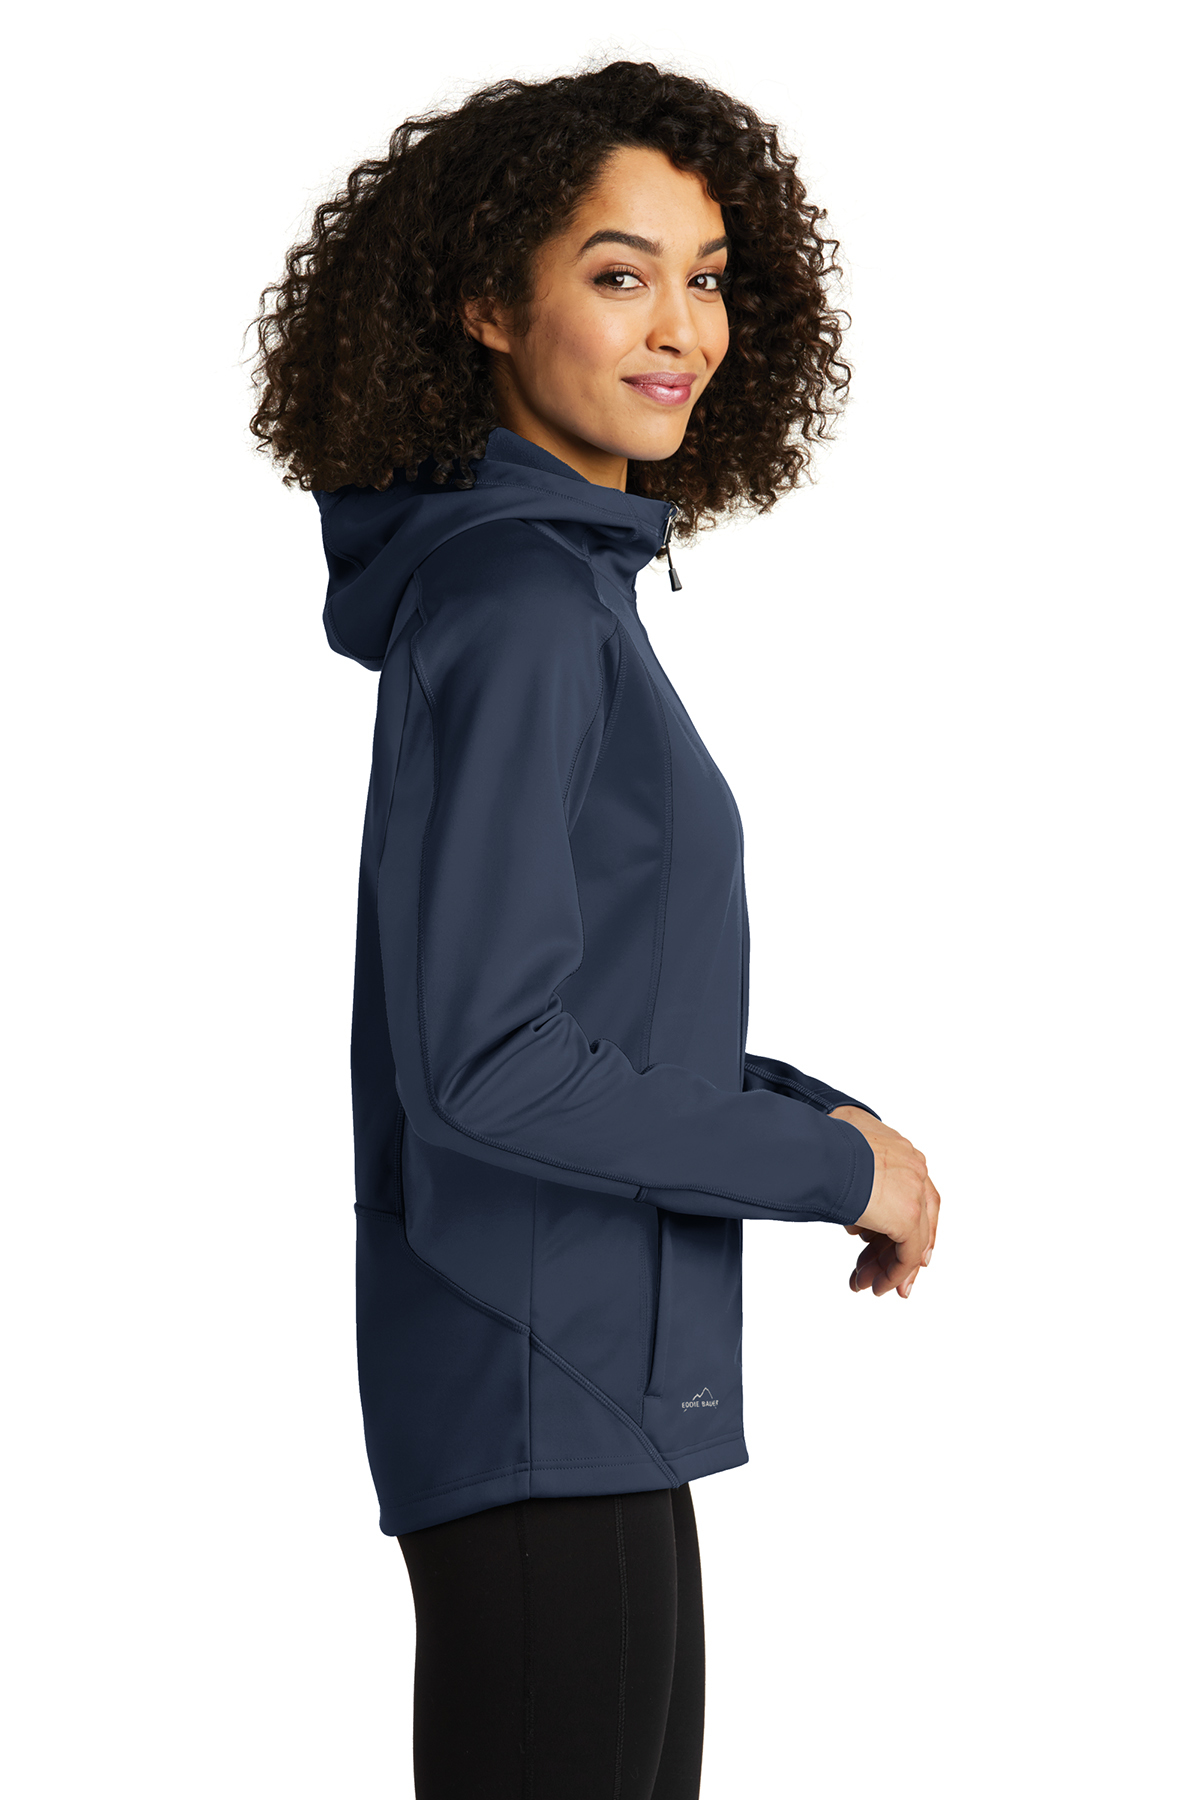 Eddie Bauer Ladies | Soft Shell Casuals | Trail Company Product Jacket